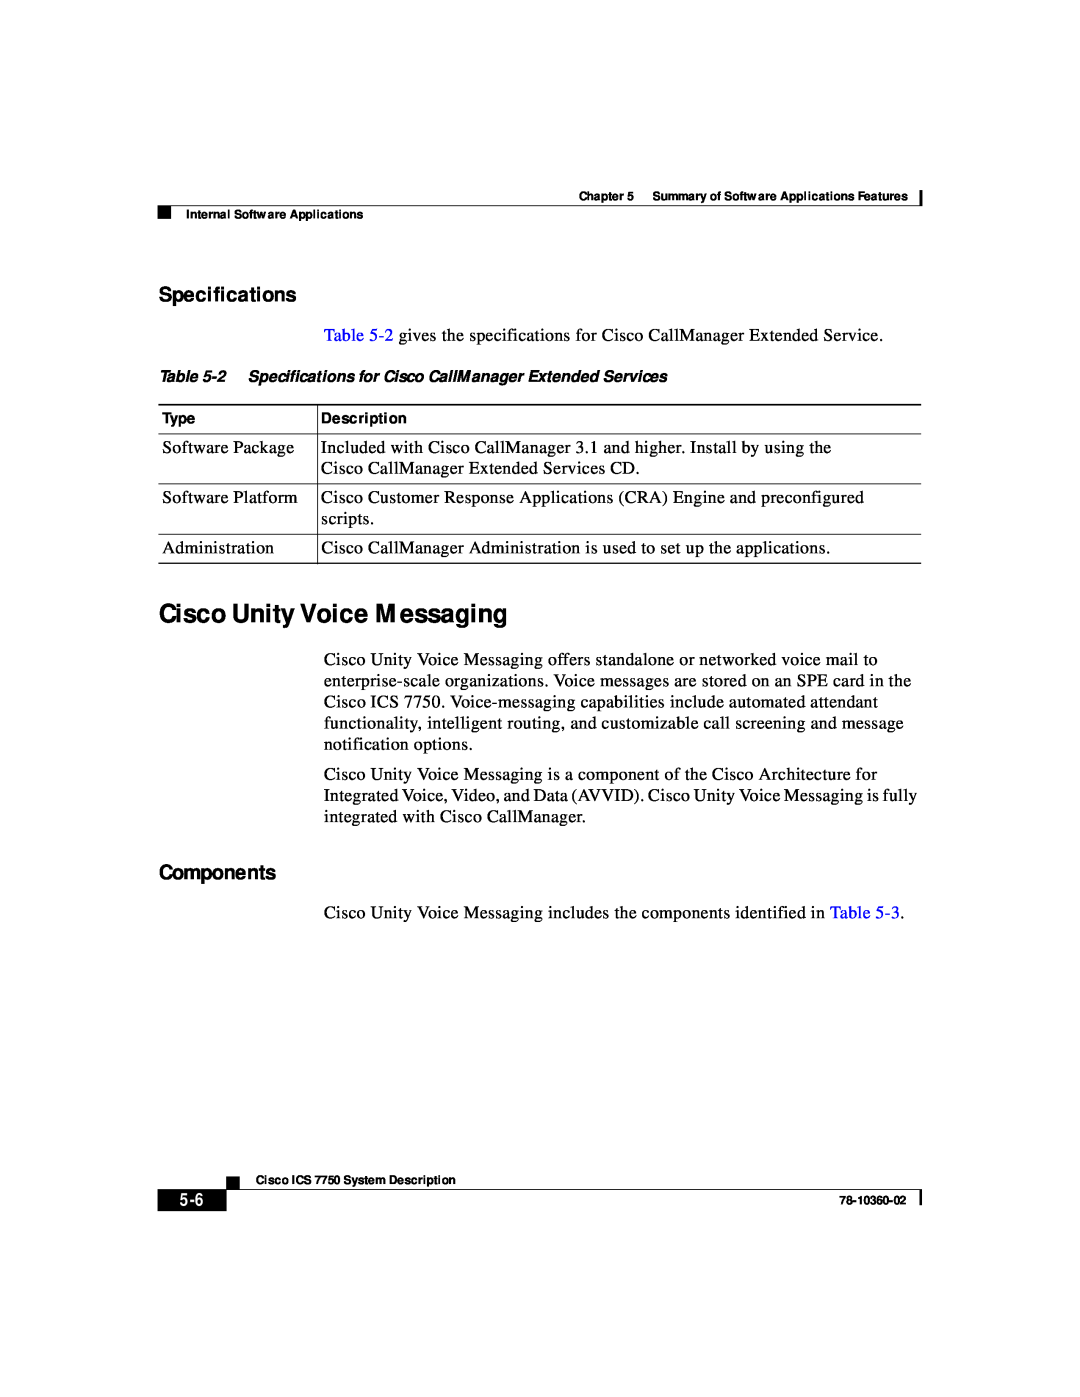 Cisco Systems ICS-7750 manual Cisco Unity Voice Messaging, Specifications, Components 